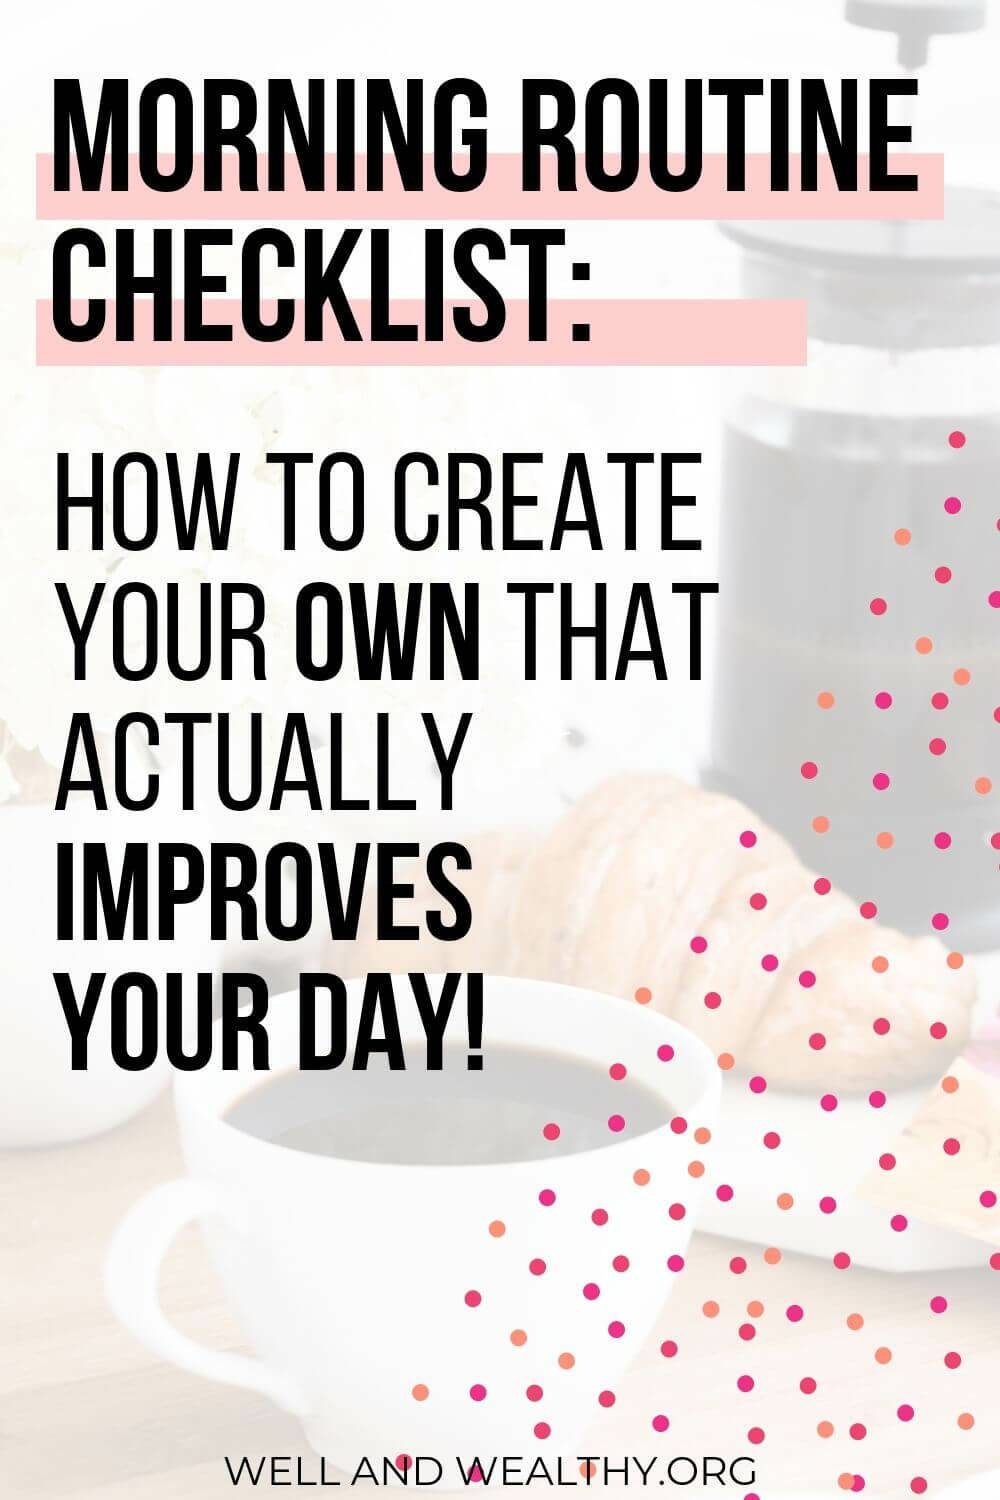 Looking for adult morning routine ideas to help make your life healthy and productive? Then this post will help you, especially for women, you will learn how to make an amazing morning routine checklist. These tips will help you get in that all-important self-care before work. PLUS don’t forget to grab your free printable checklist! #morningroutine #freeprintable #getorganized #selfcare